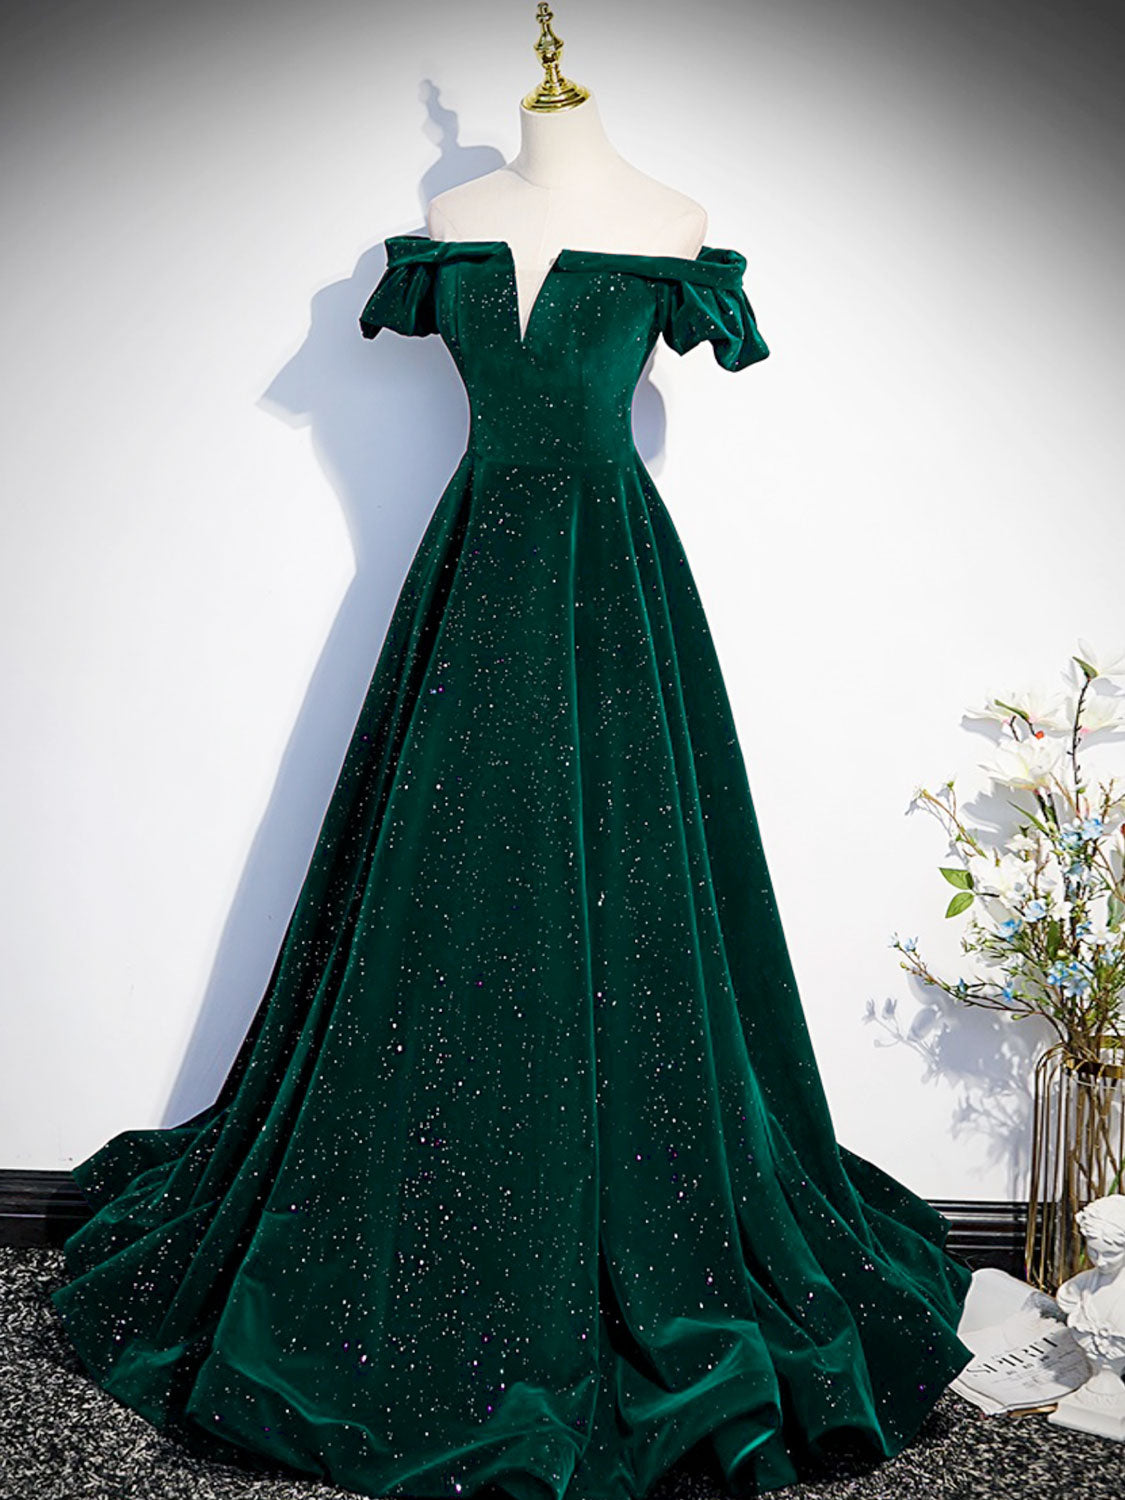 Exquisite Emerald Green Evening Dress for a Glamorous Gala with Intricate  Beading - China Princess Dress and Fashion Dress price | Made-in-China.com